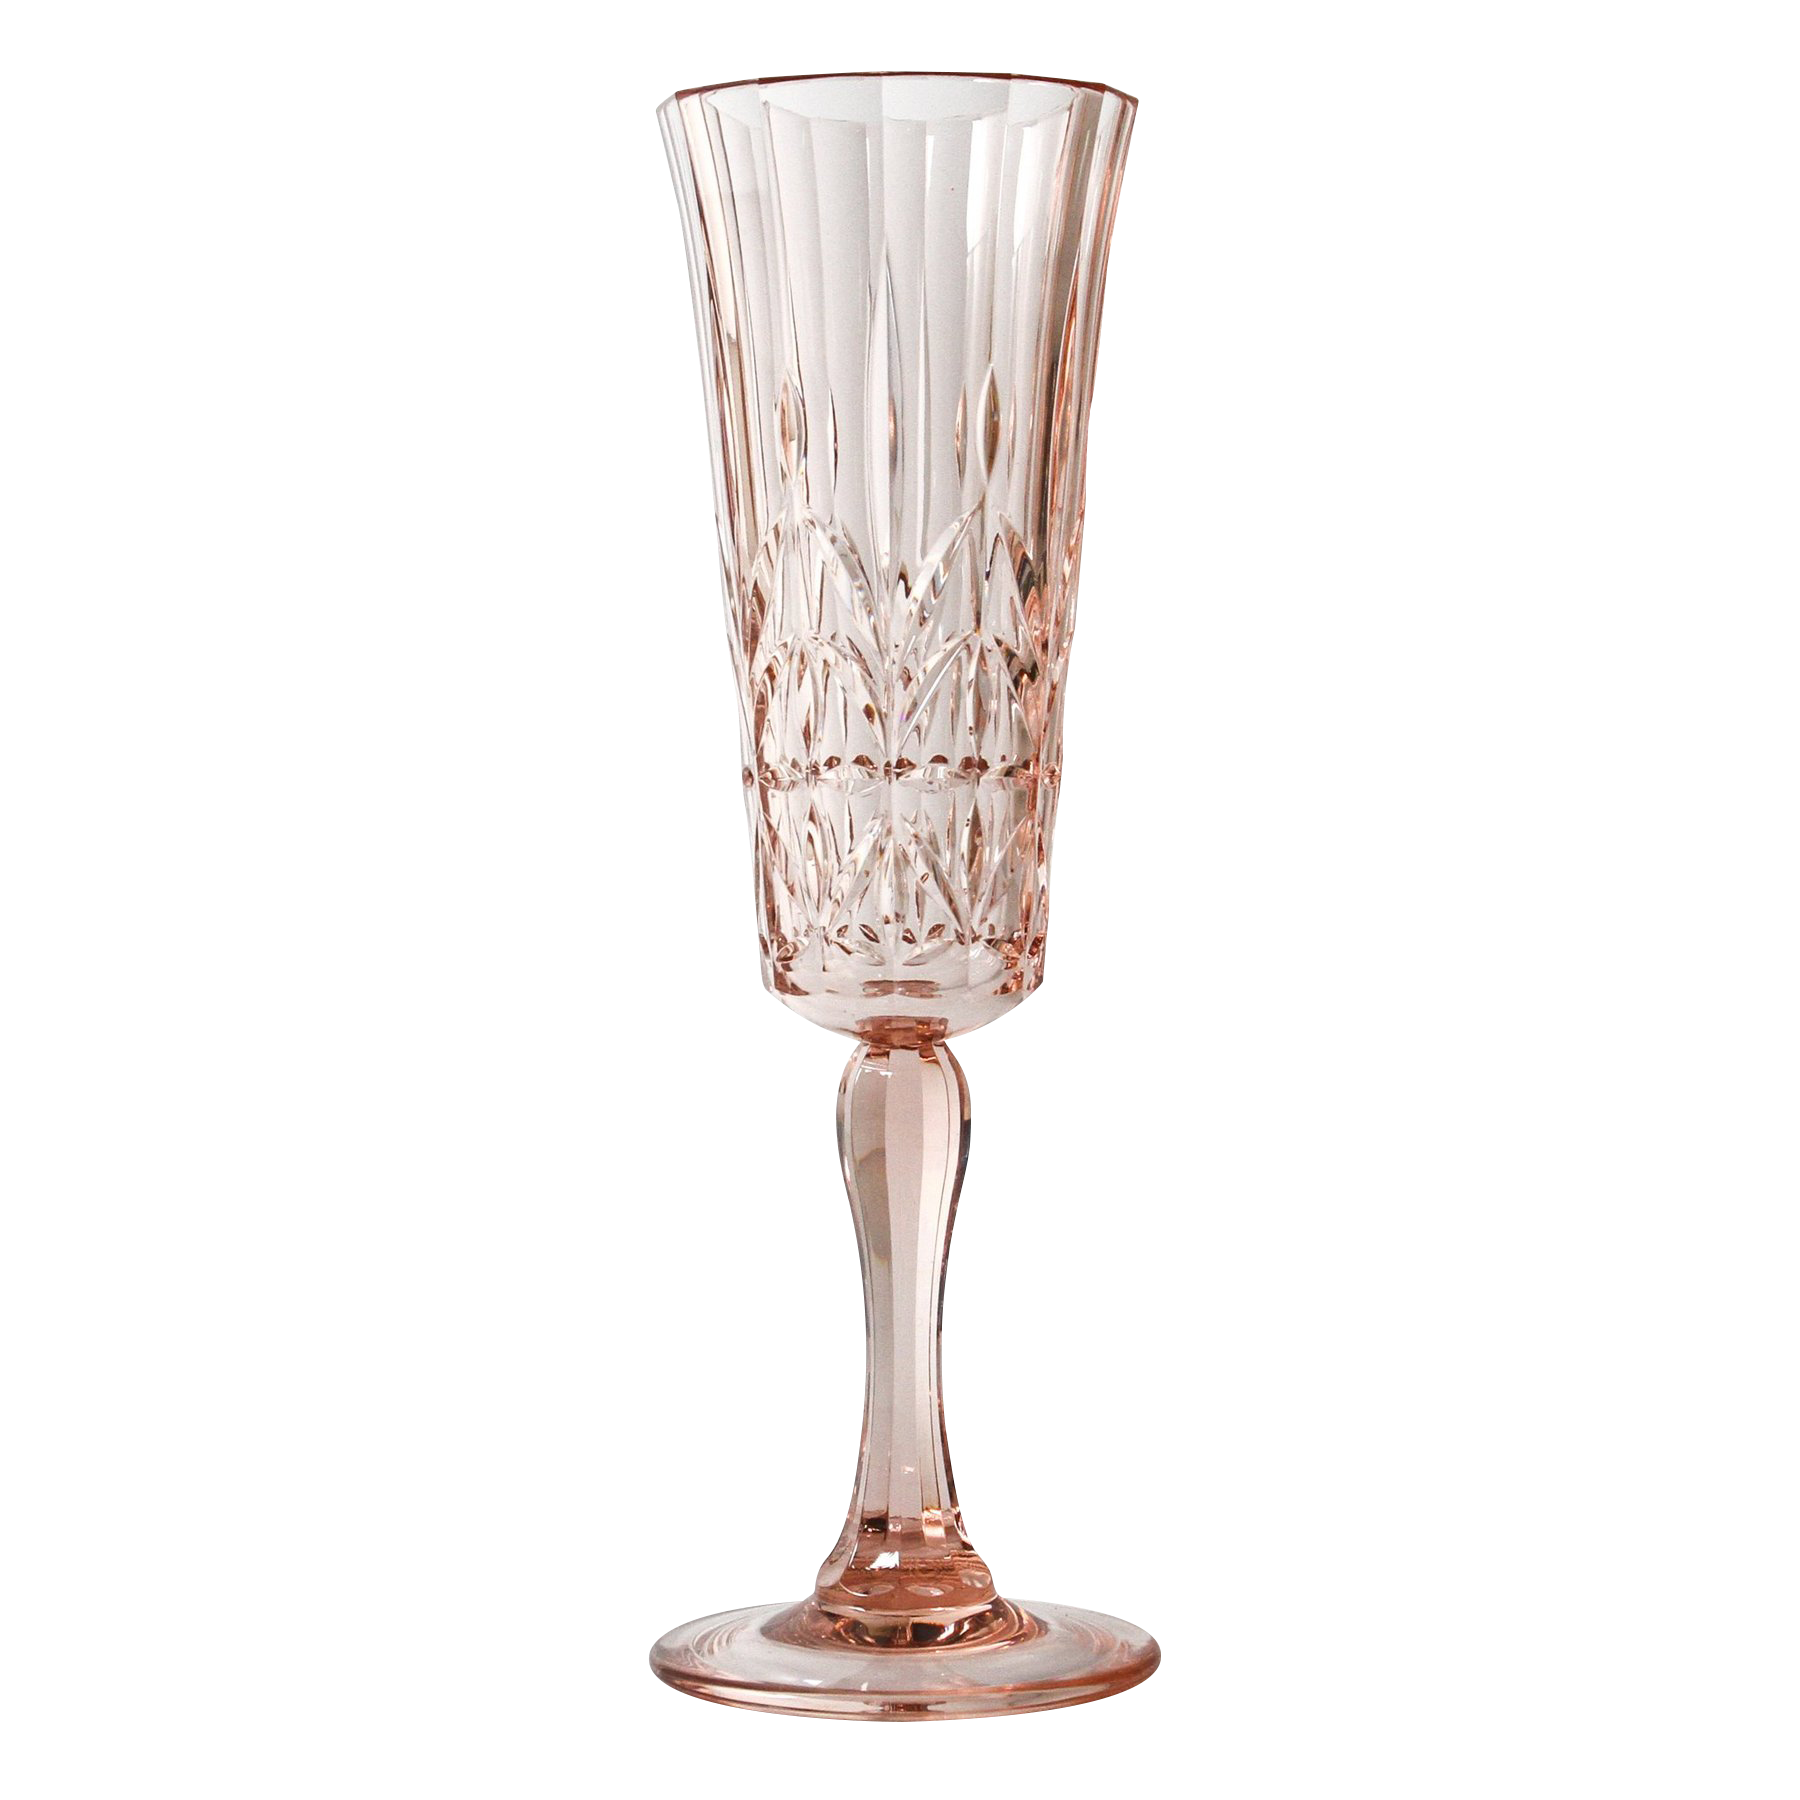 Marquee Acrylic Champagne Flute - Blush